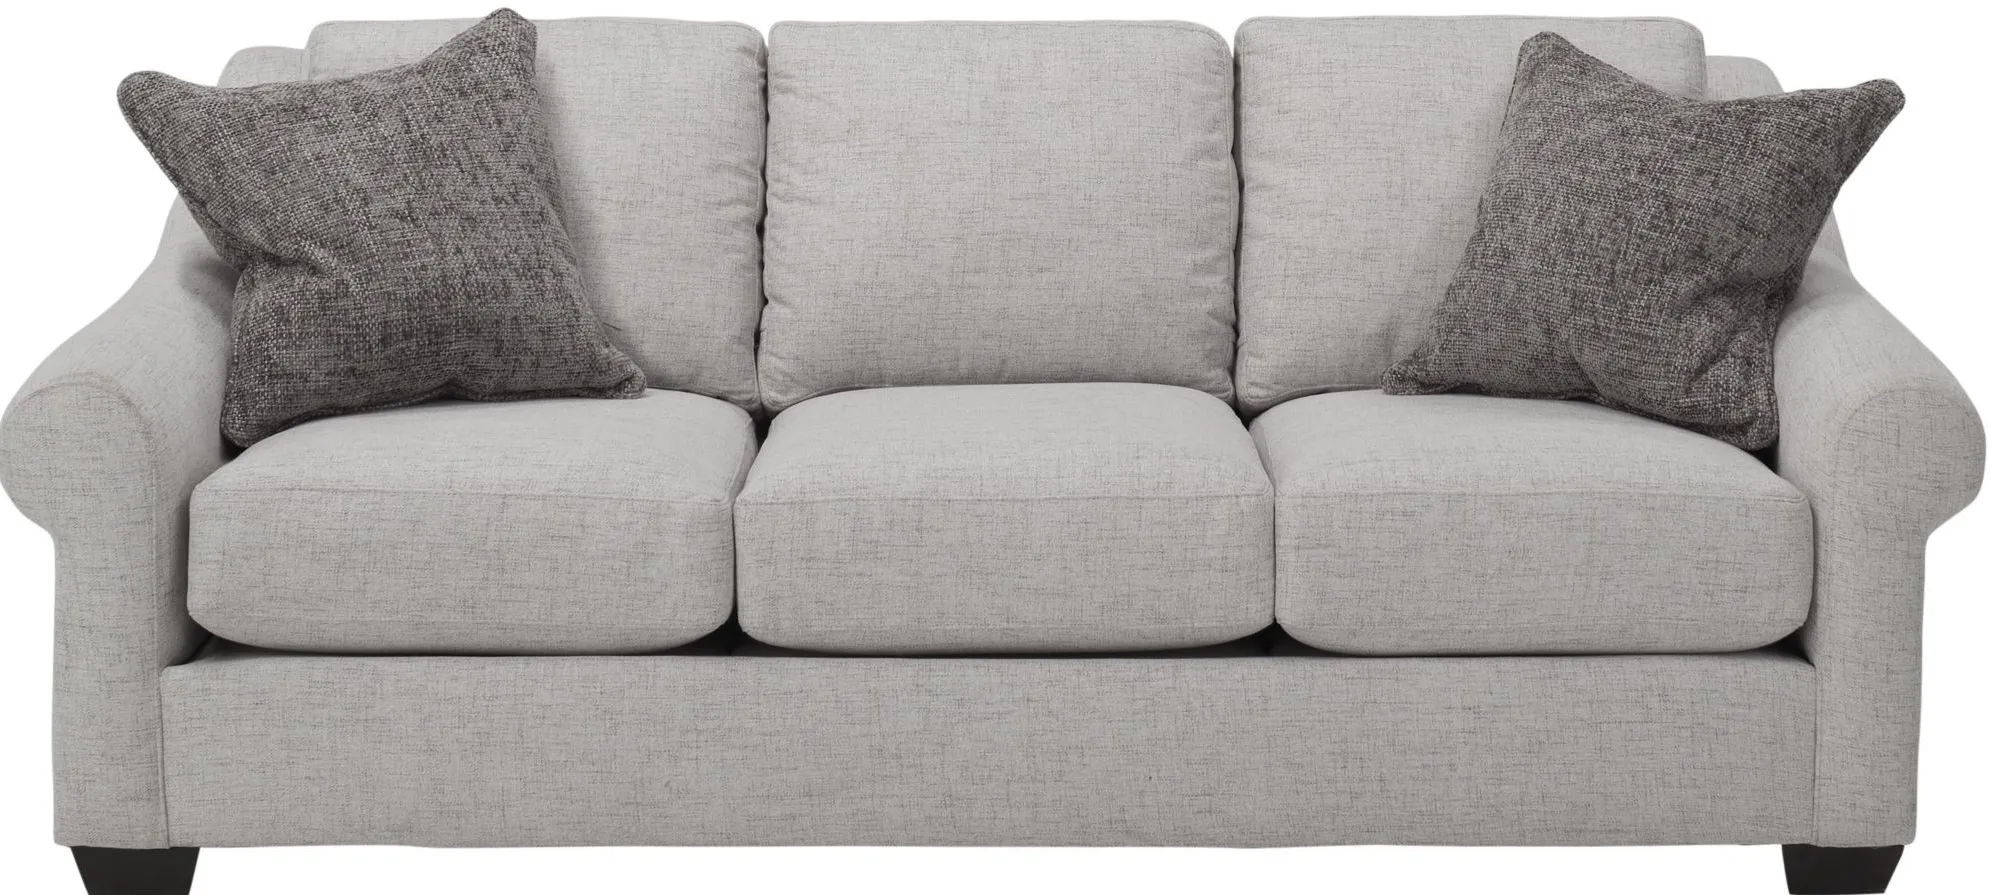 Thatcher Sofa in Gray by Alan White